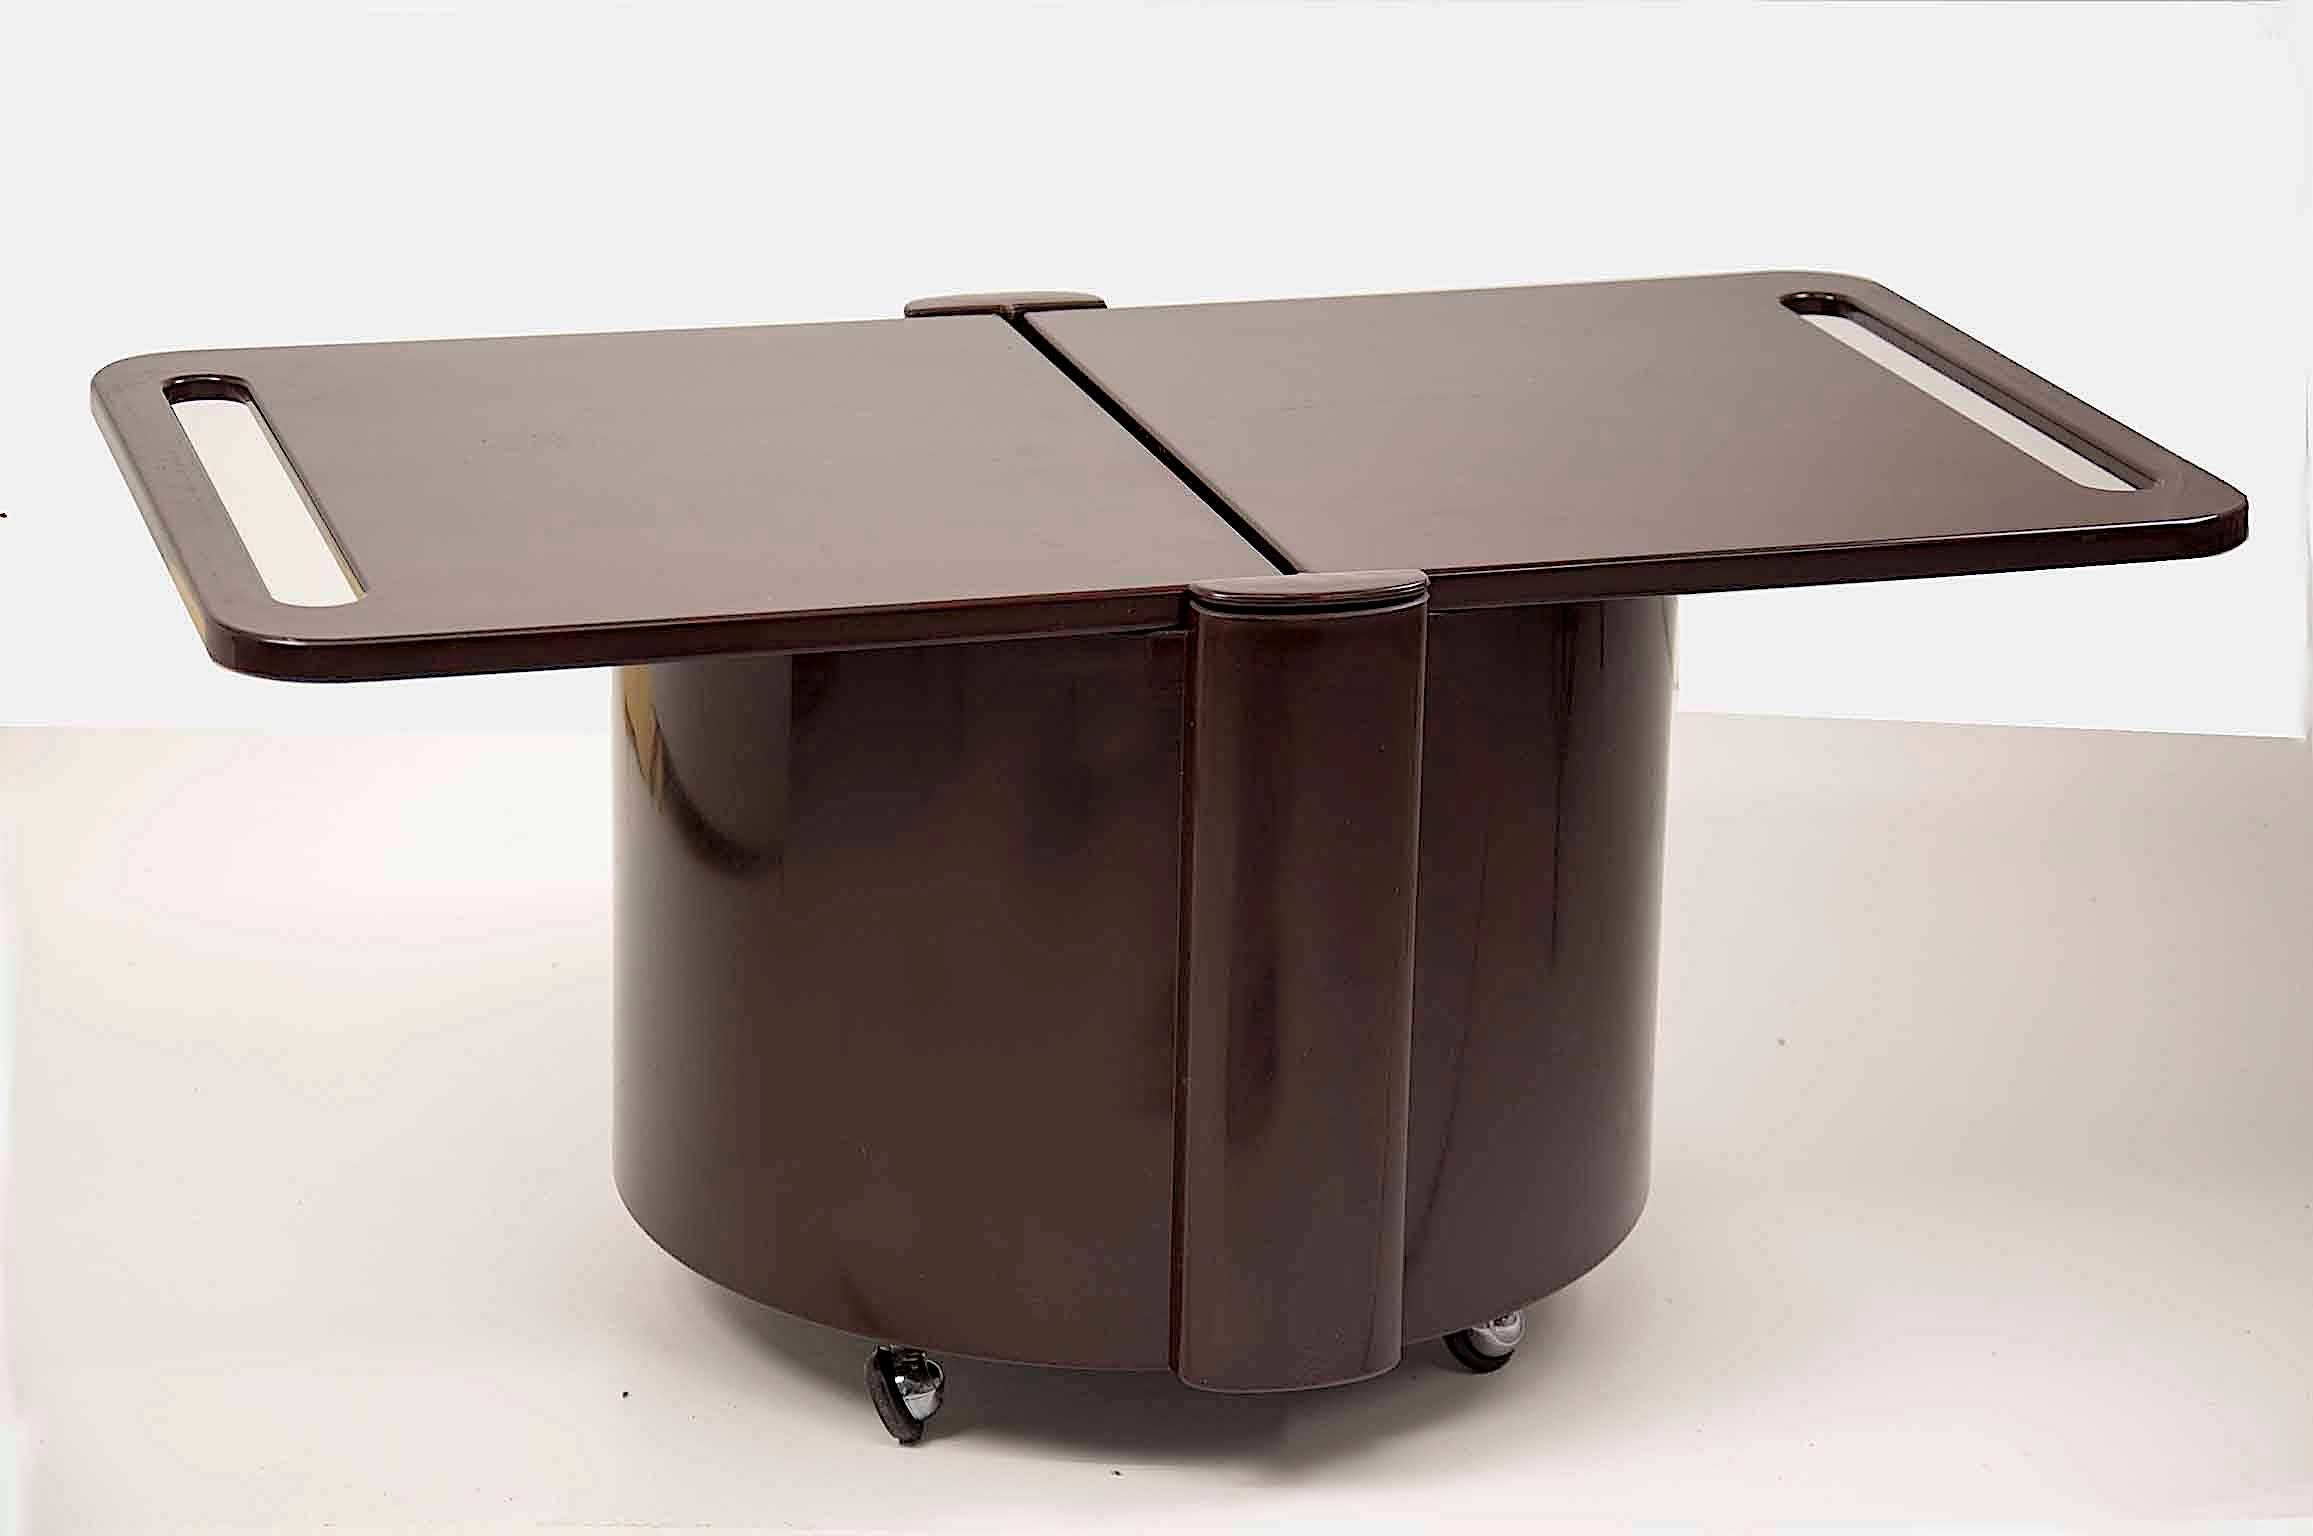 Vintage Space Age bar coffee table
Brown low table, in plastic, with four wheels the bar cart is very easy to move.
The plastic panels of the table top folds inside.